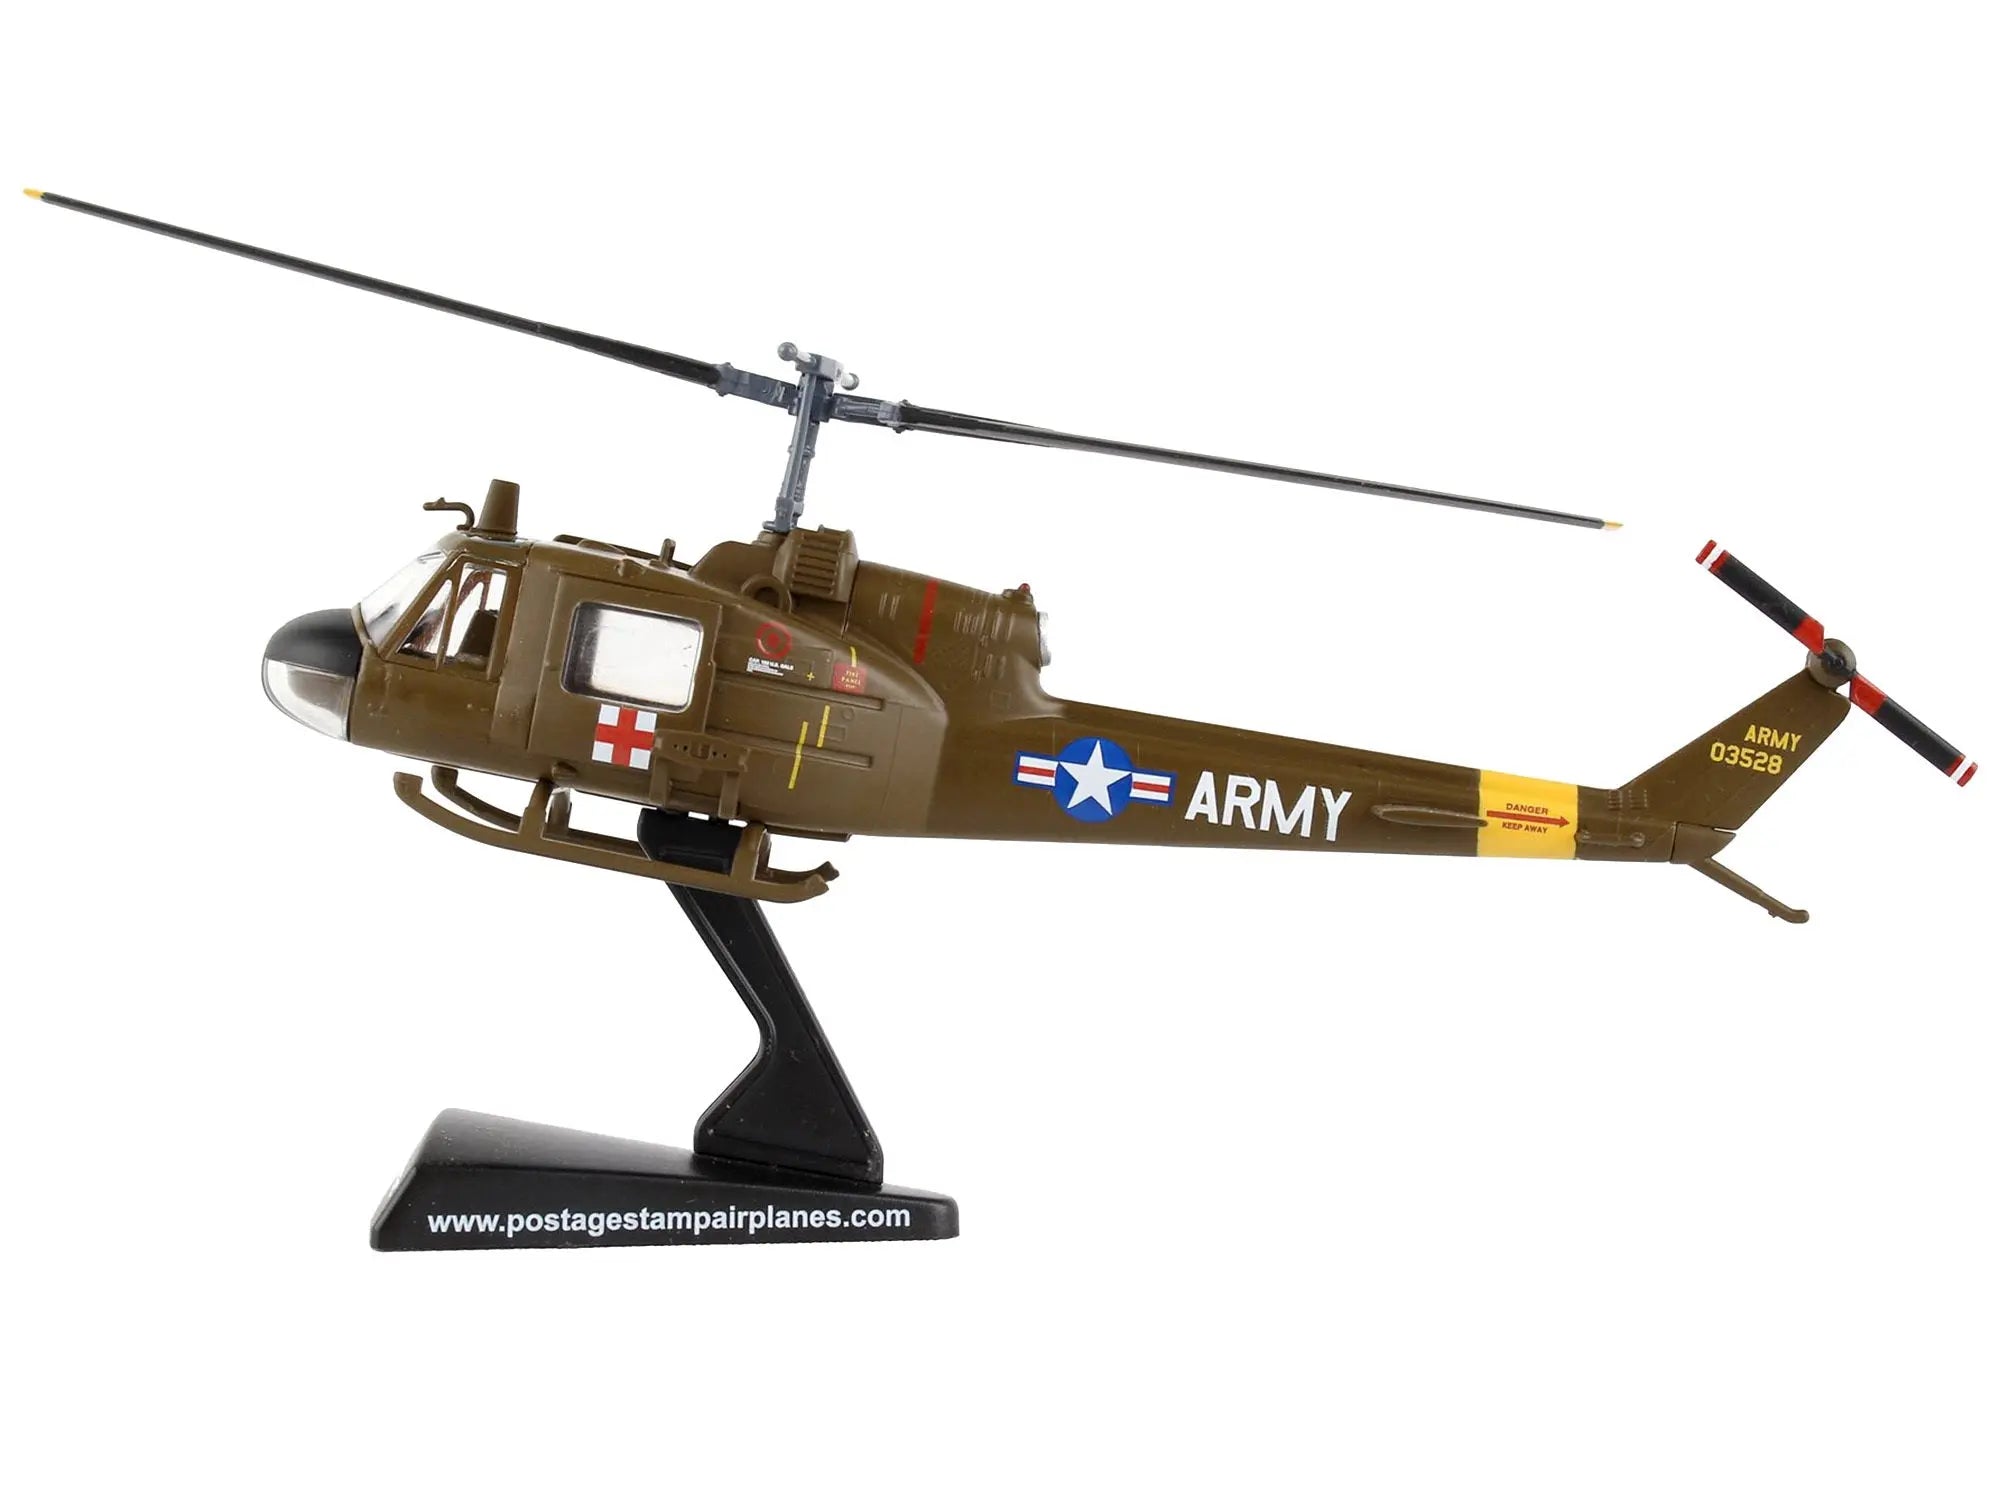 Bell UH-1 Iroquois "Huey" Helicopter "MEDEVAC" United States Army 1/87 (HO) Diecast Model by Postage Stamp Postage Stamp